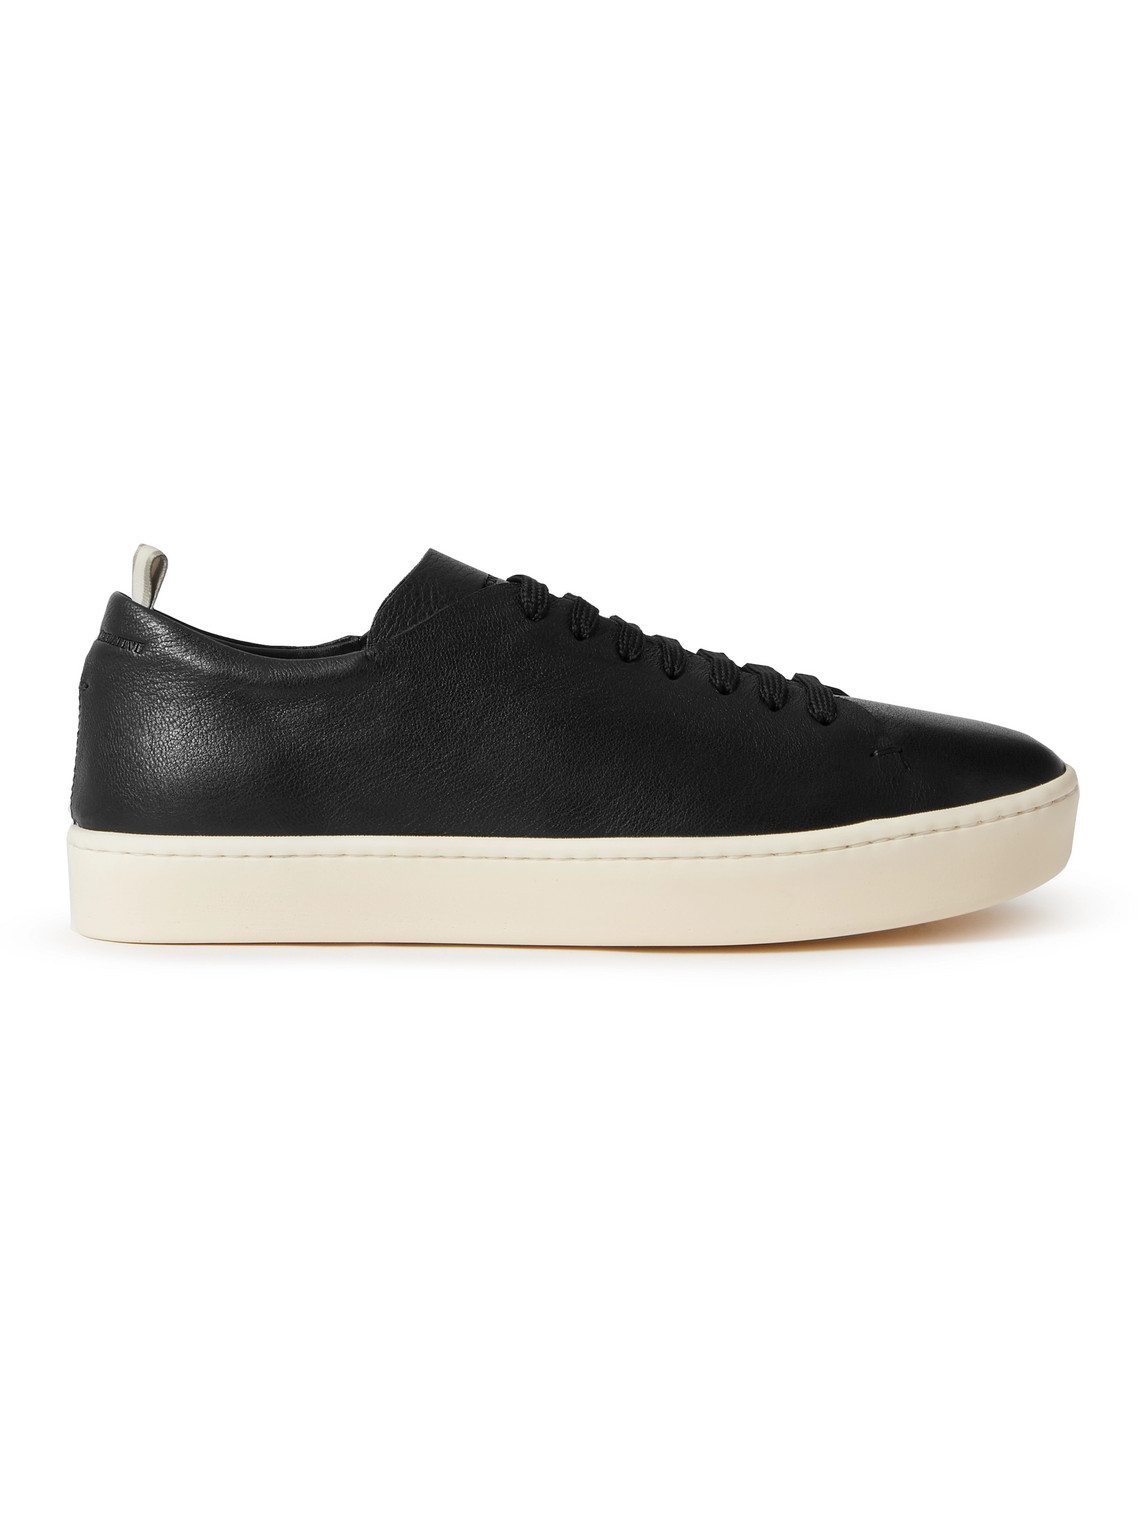 Officine Creative Kreig Leather Sneakers